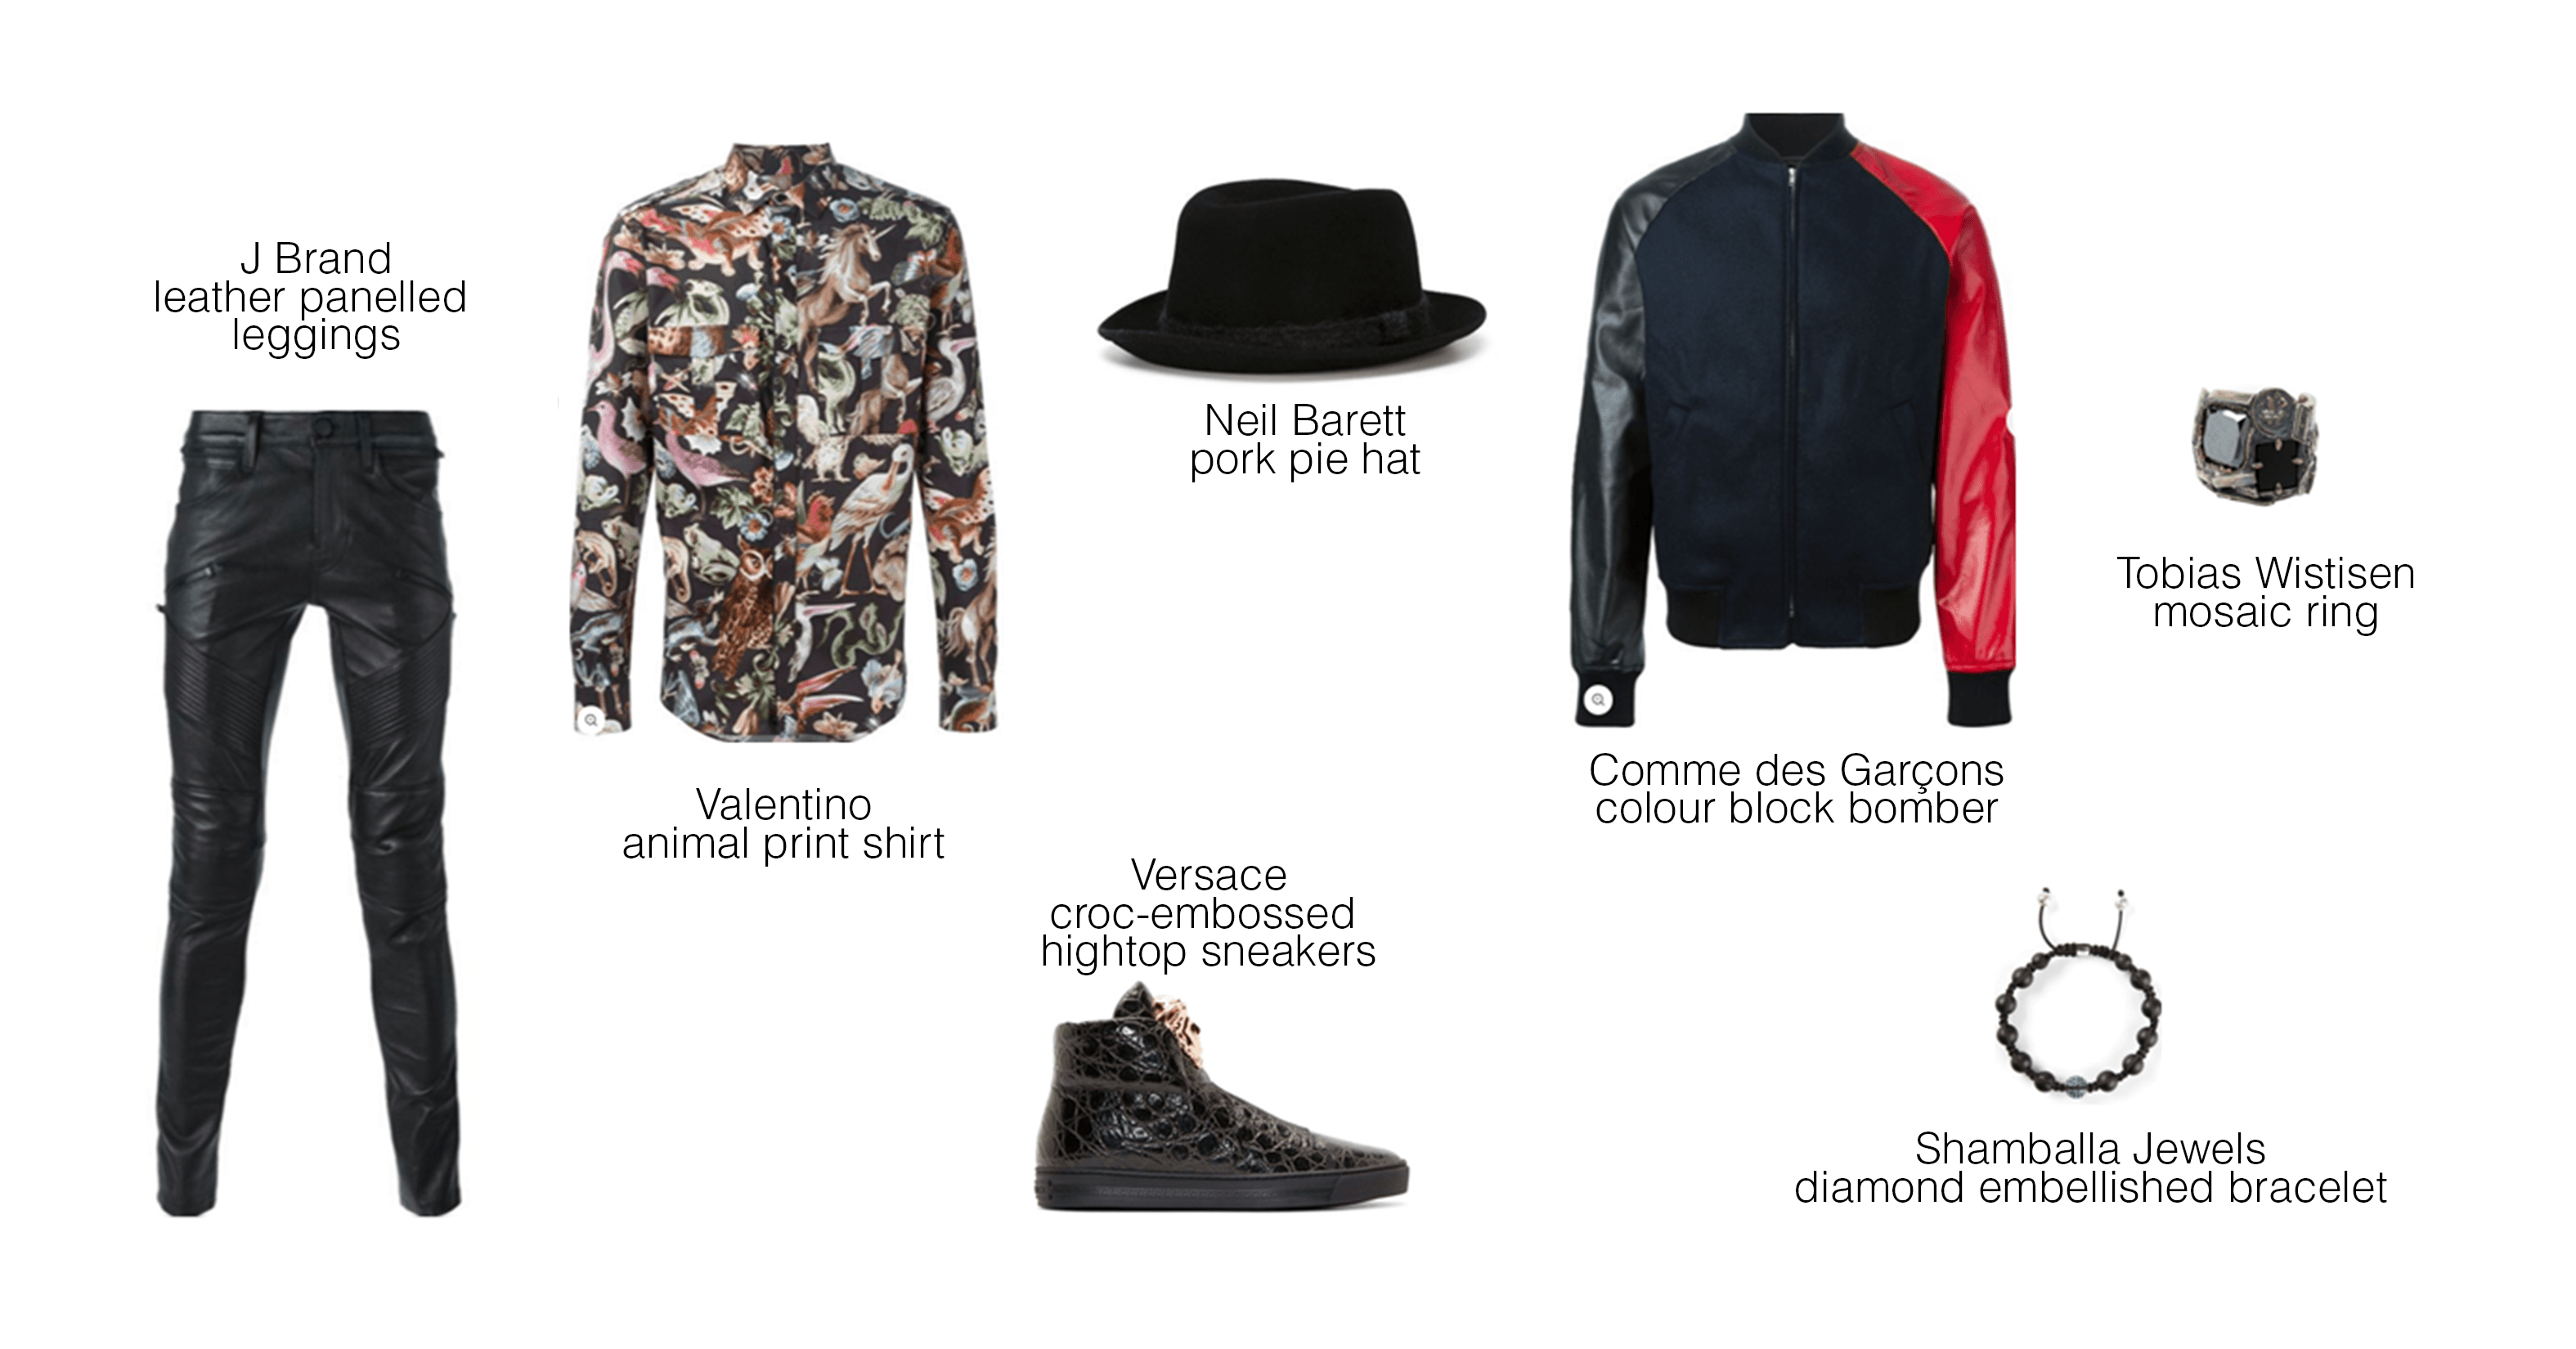 Last_Minute_New Years_Eve_Looks_for_Men_Hiphop_Fashion_Style